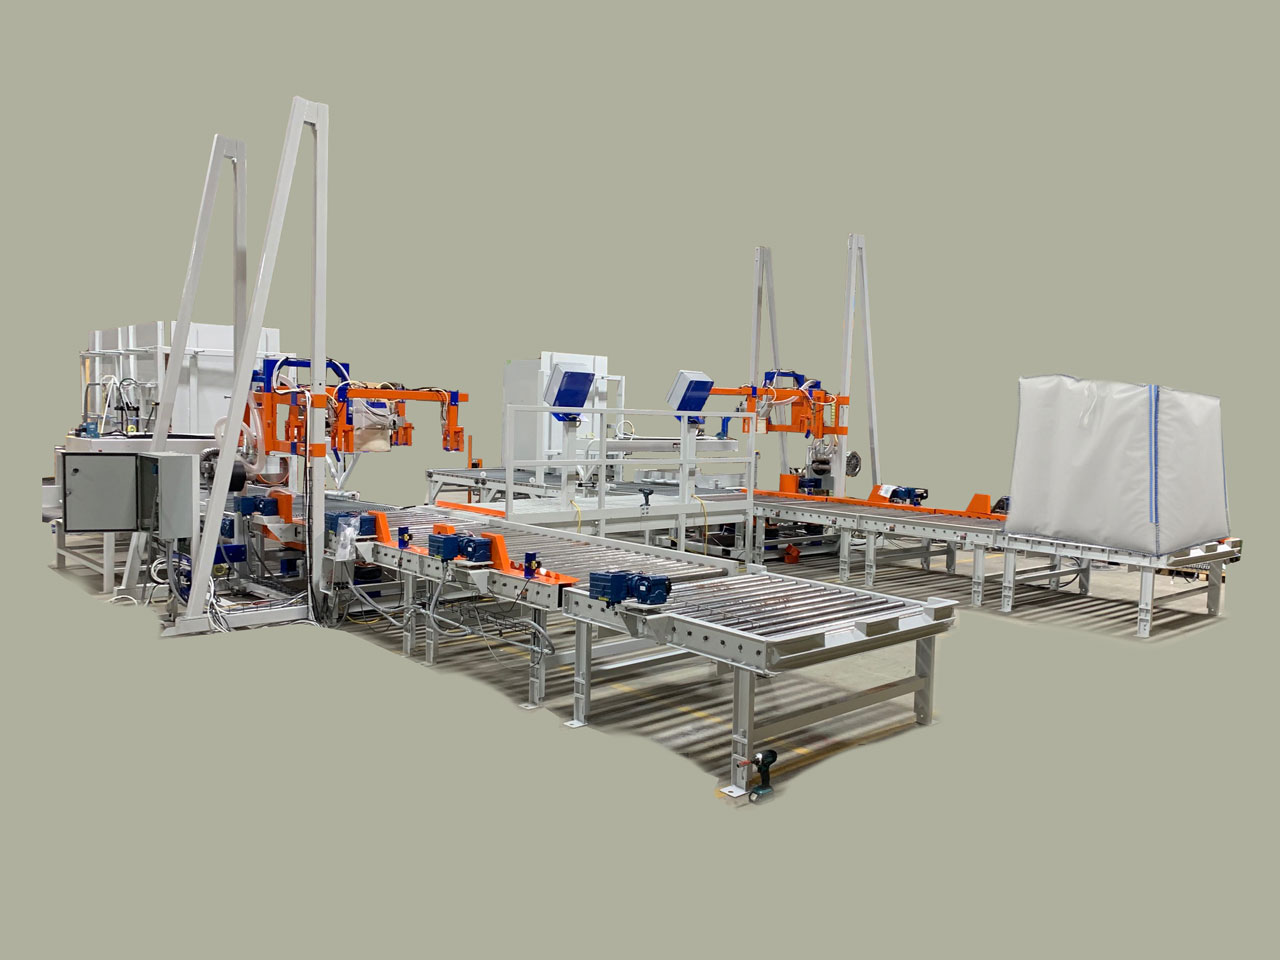 Dual Bulk Bag Fillers with Automatic Pallet Dispensers for Robotic Forklifts